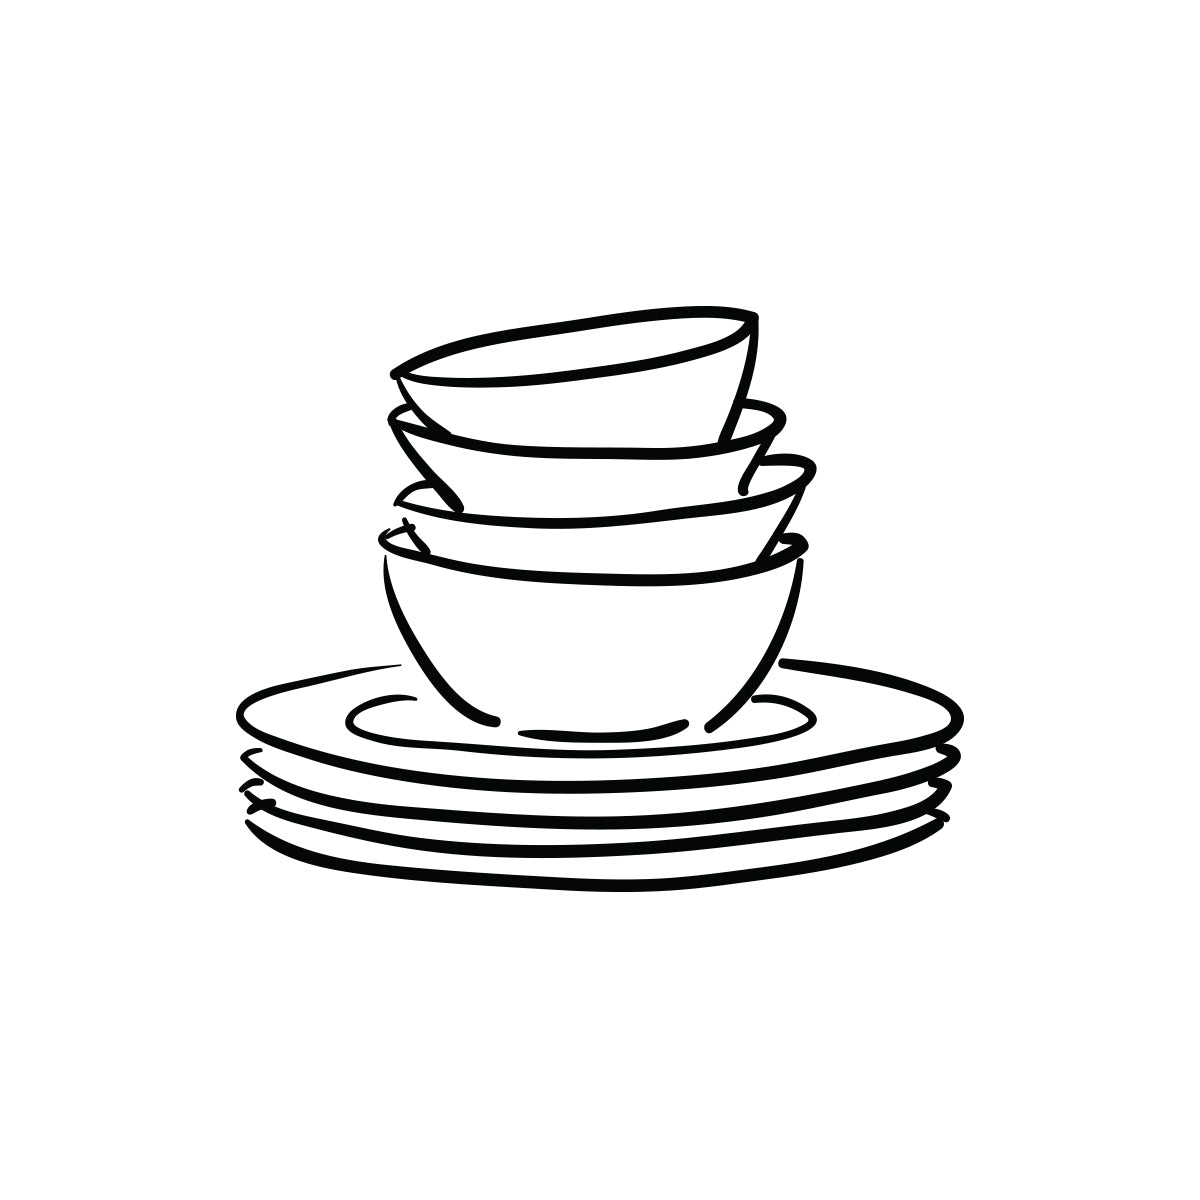 Stack of dinner plates and bowls illustration.